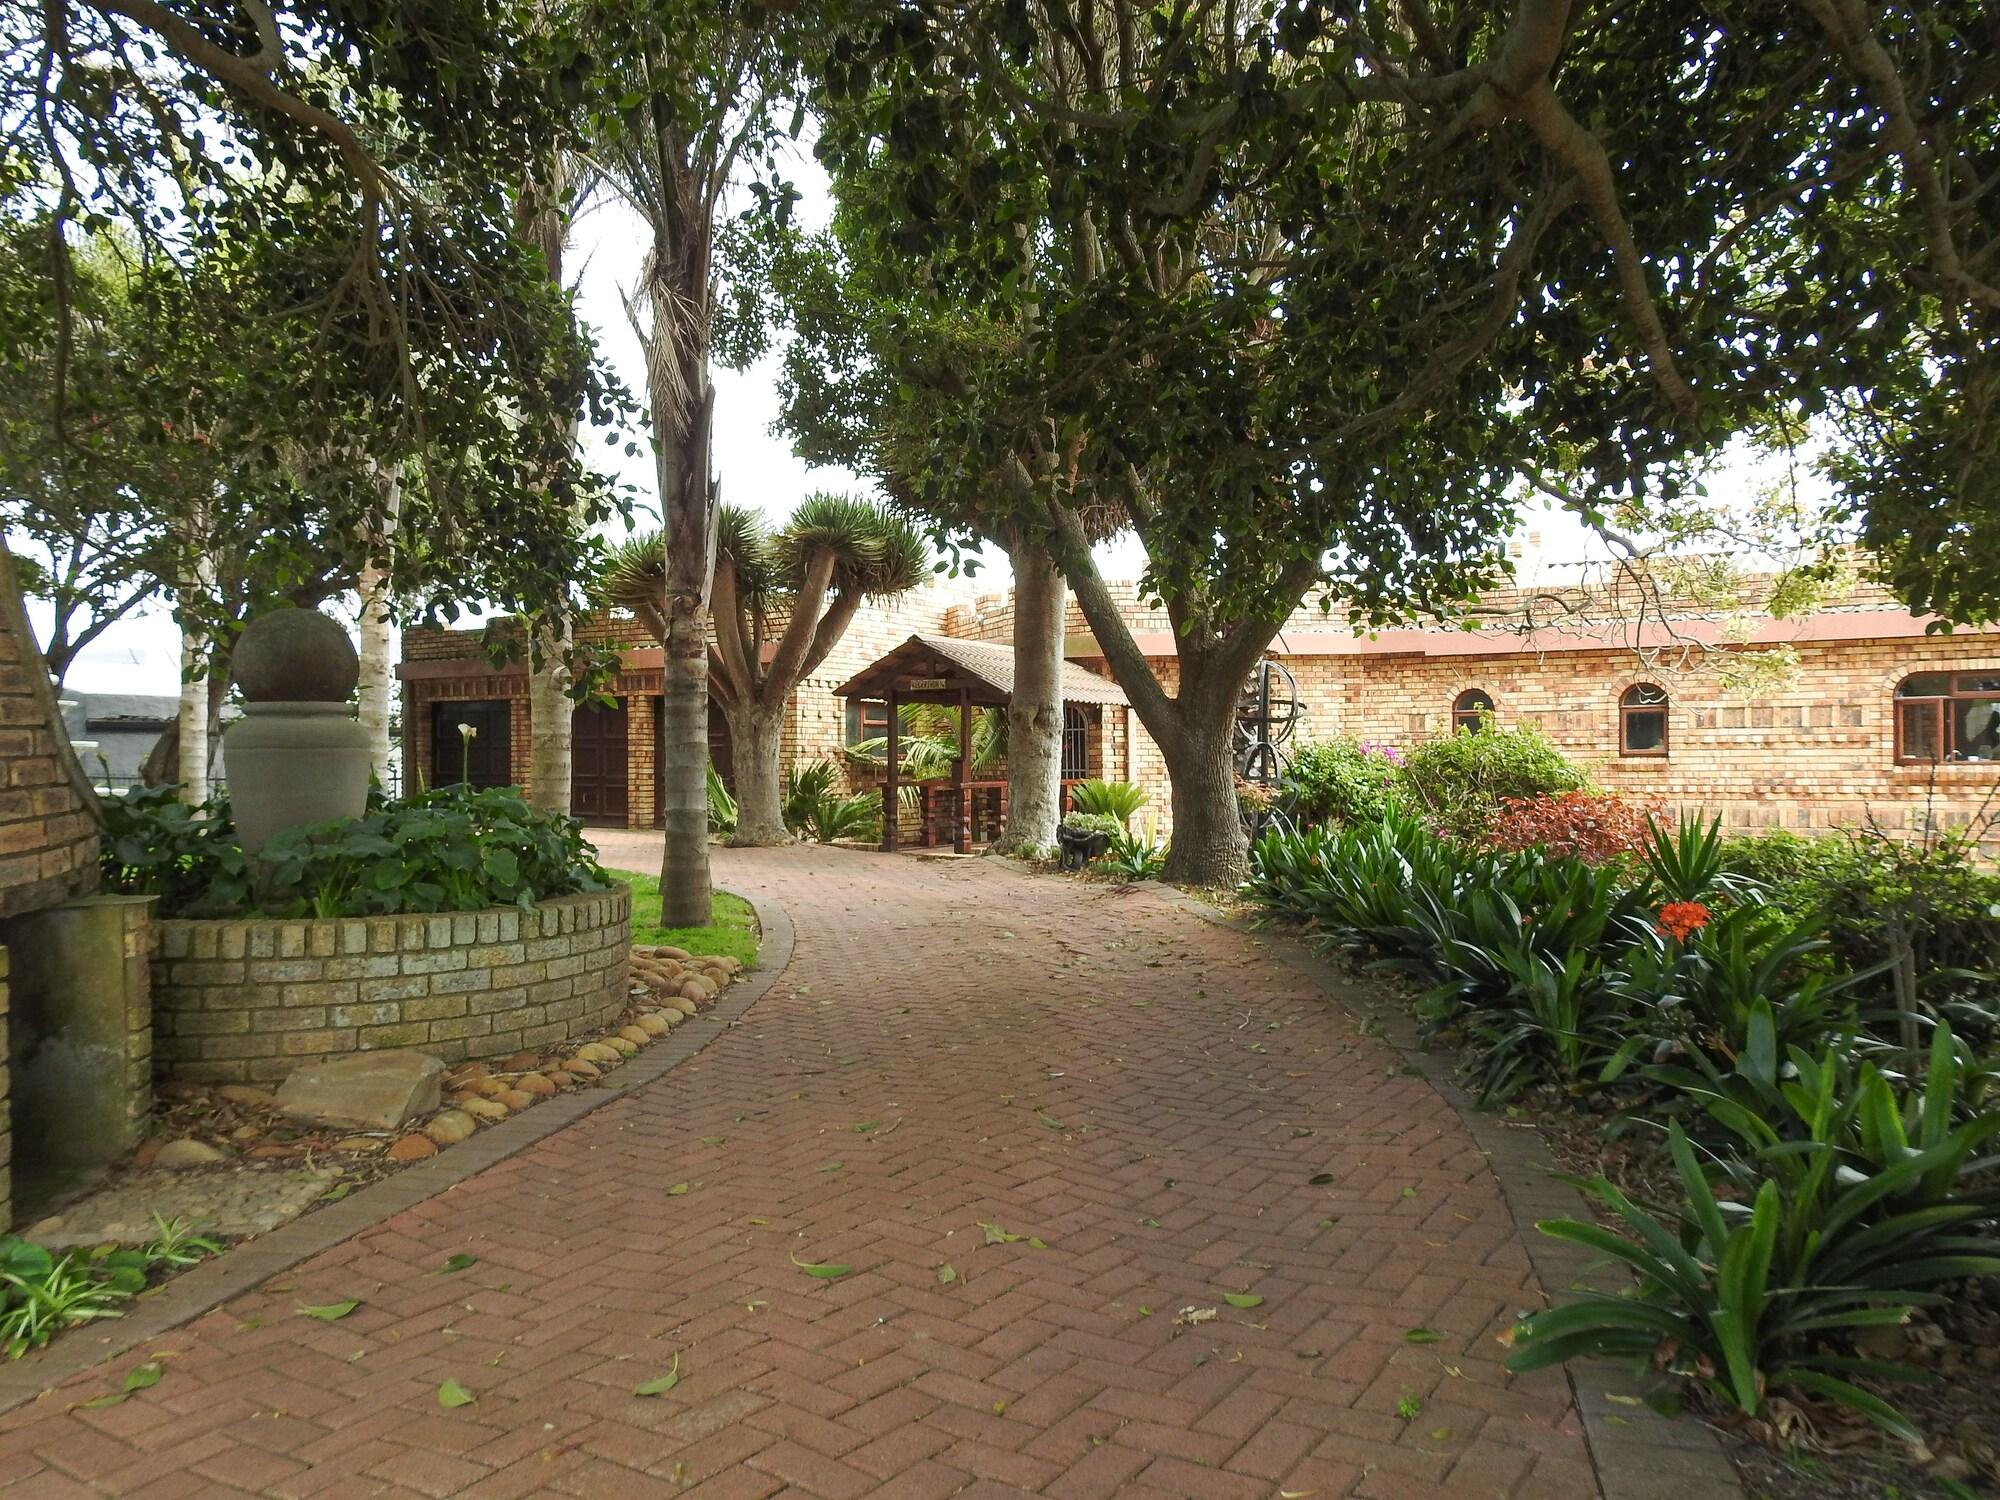 Mossel Bay Guest House